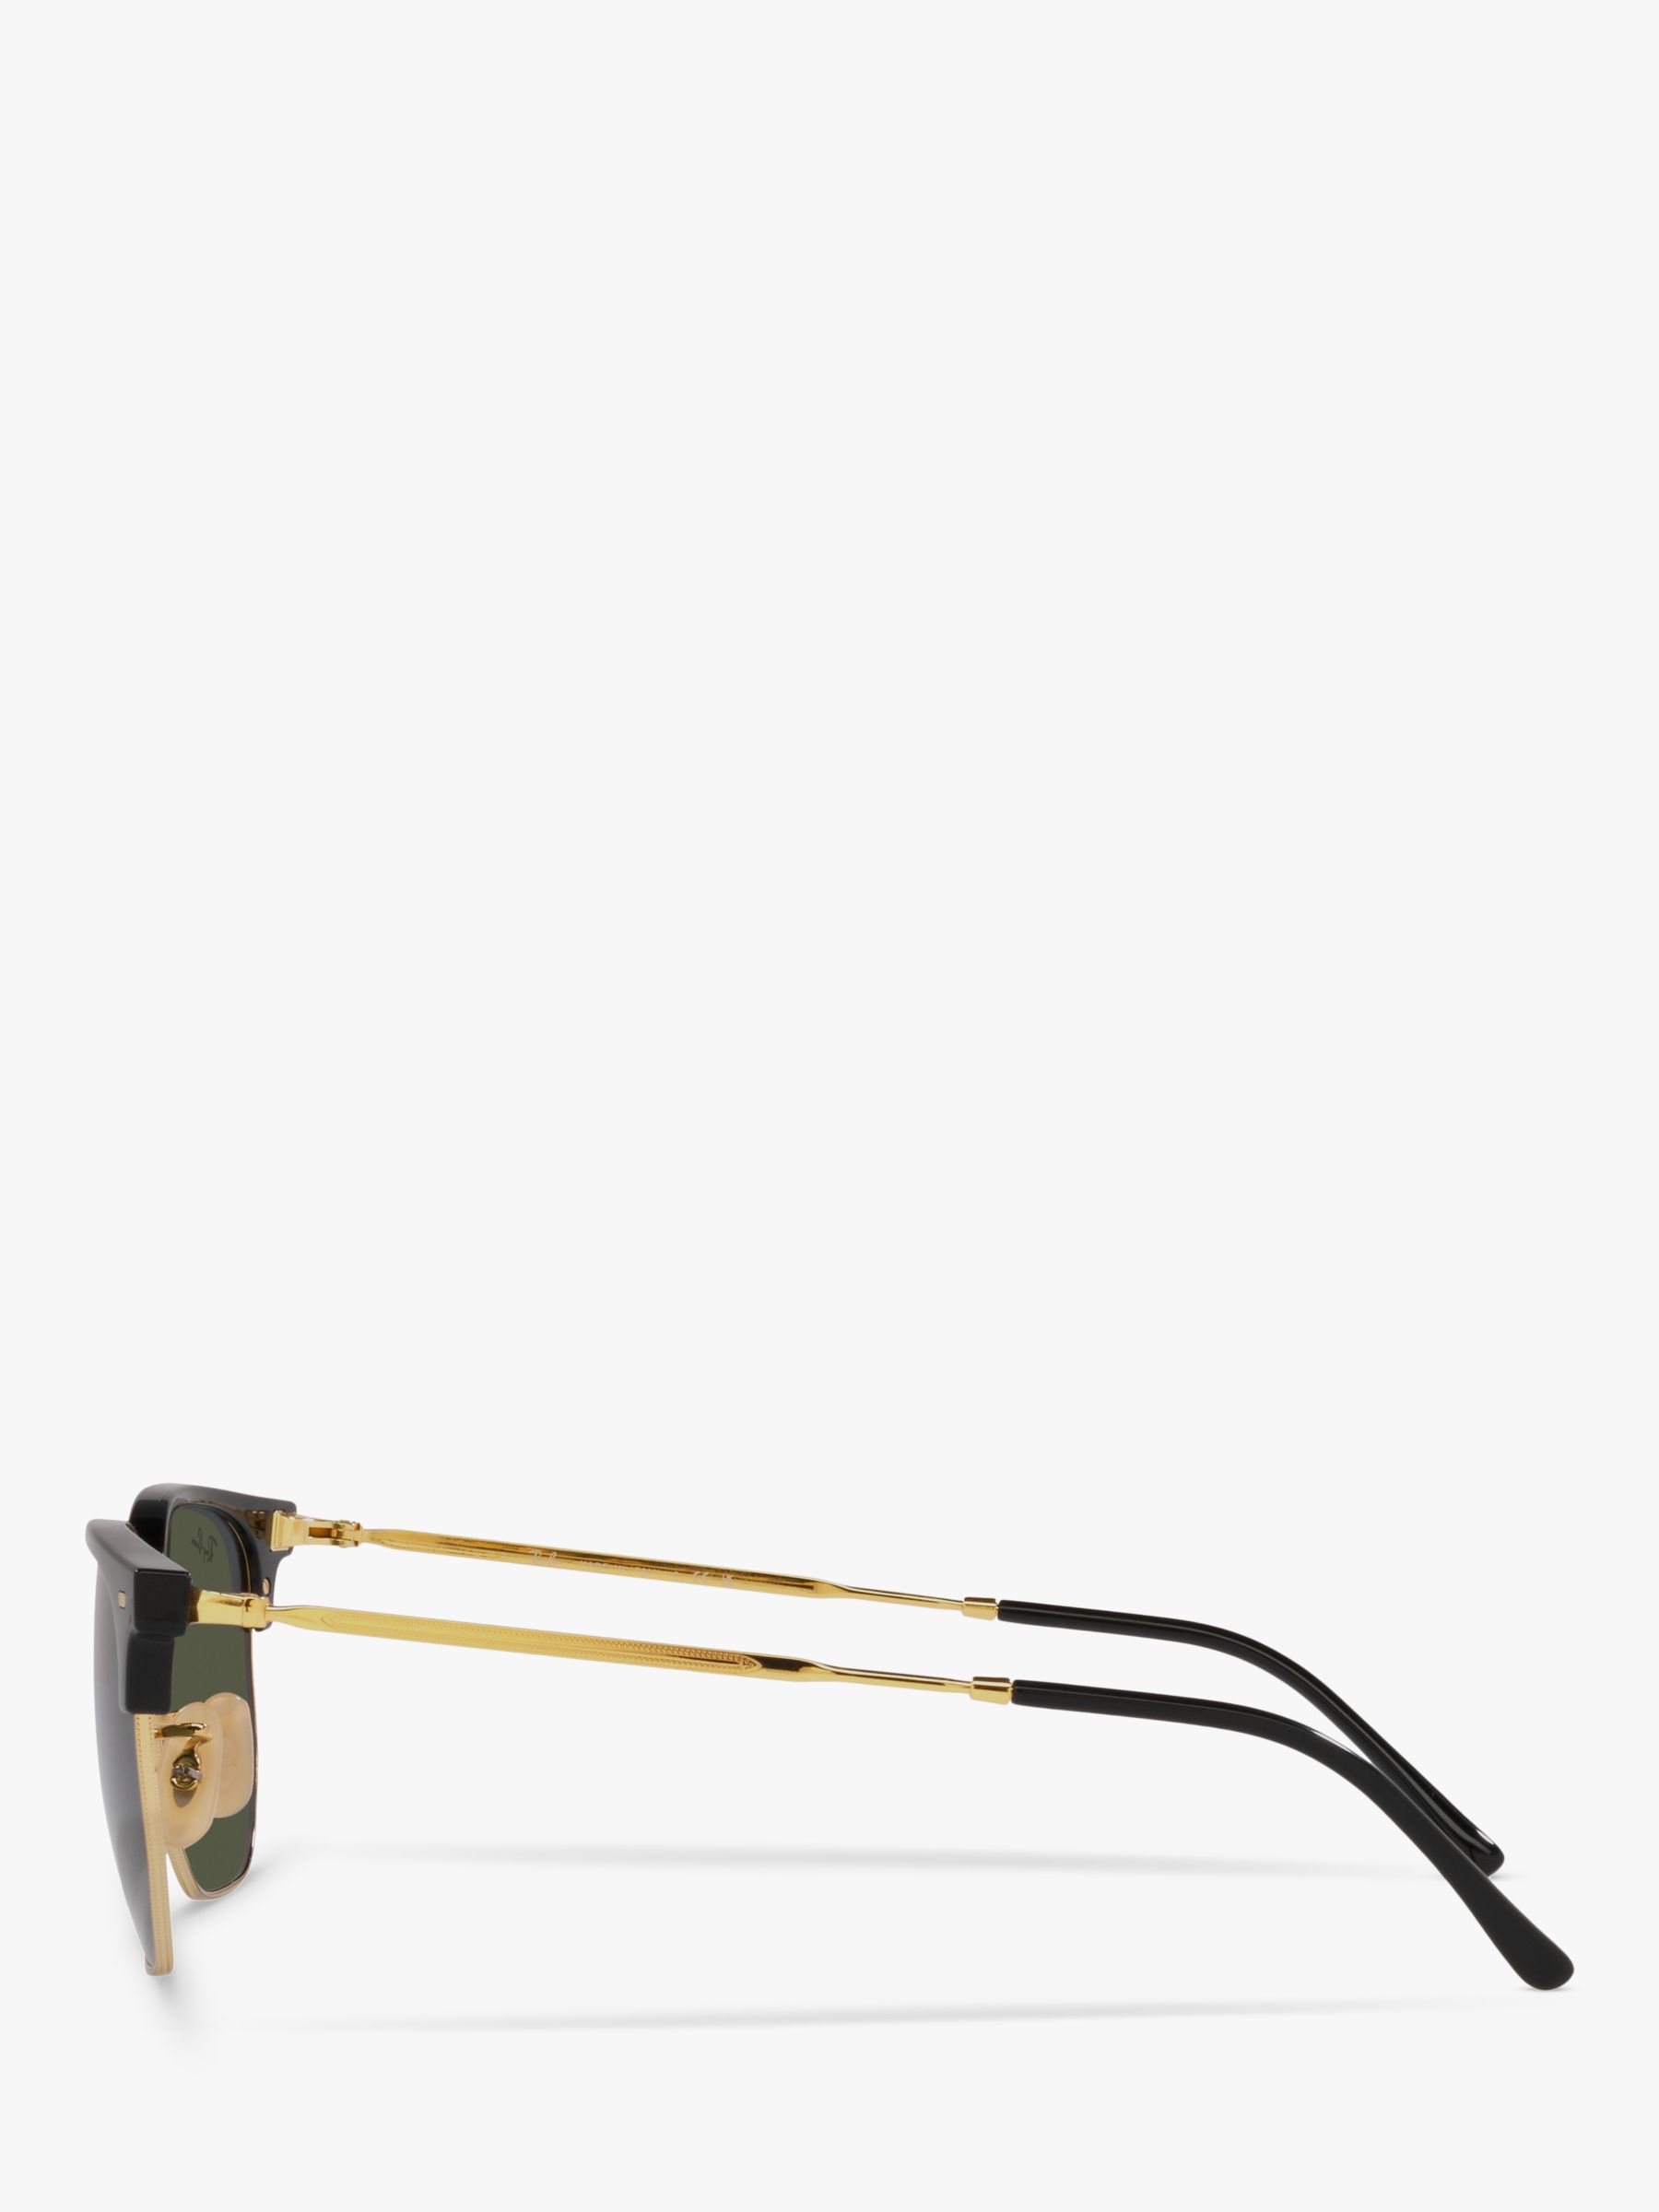 Ray-Ban RB4416 Unisex New Clubmaster Sunglasses, Black/Gold